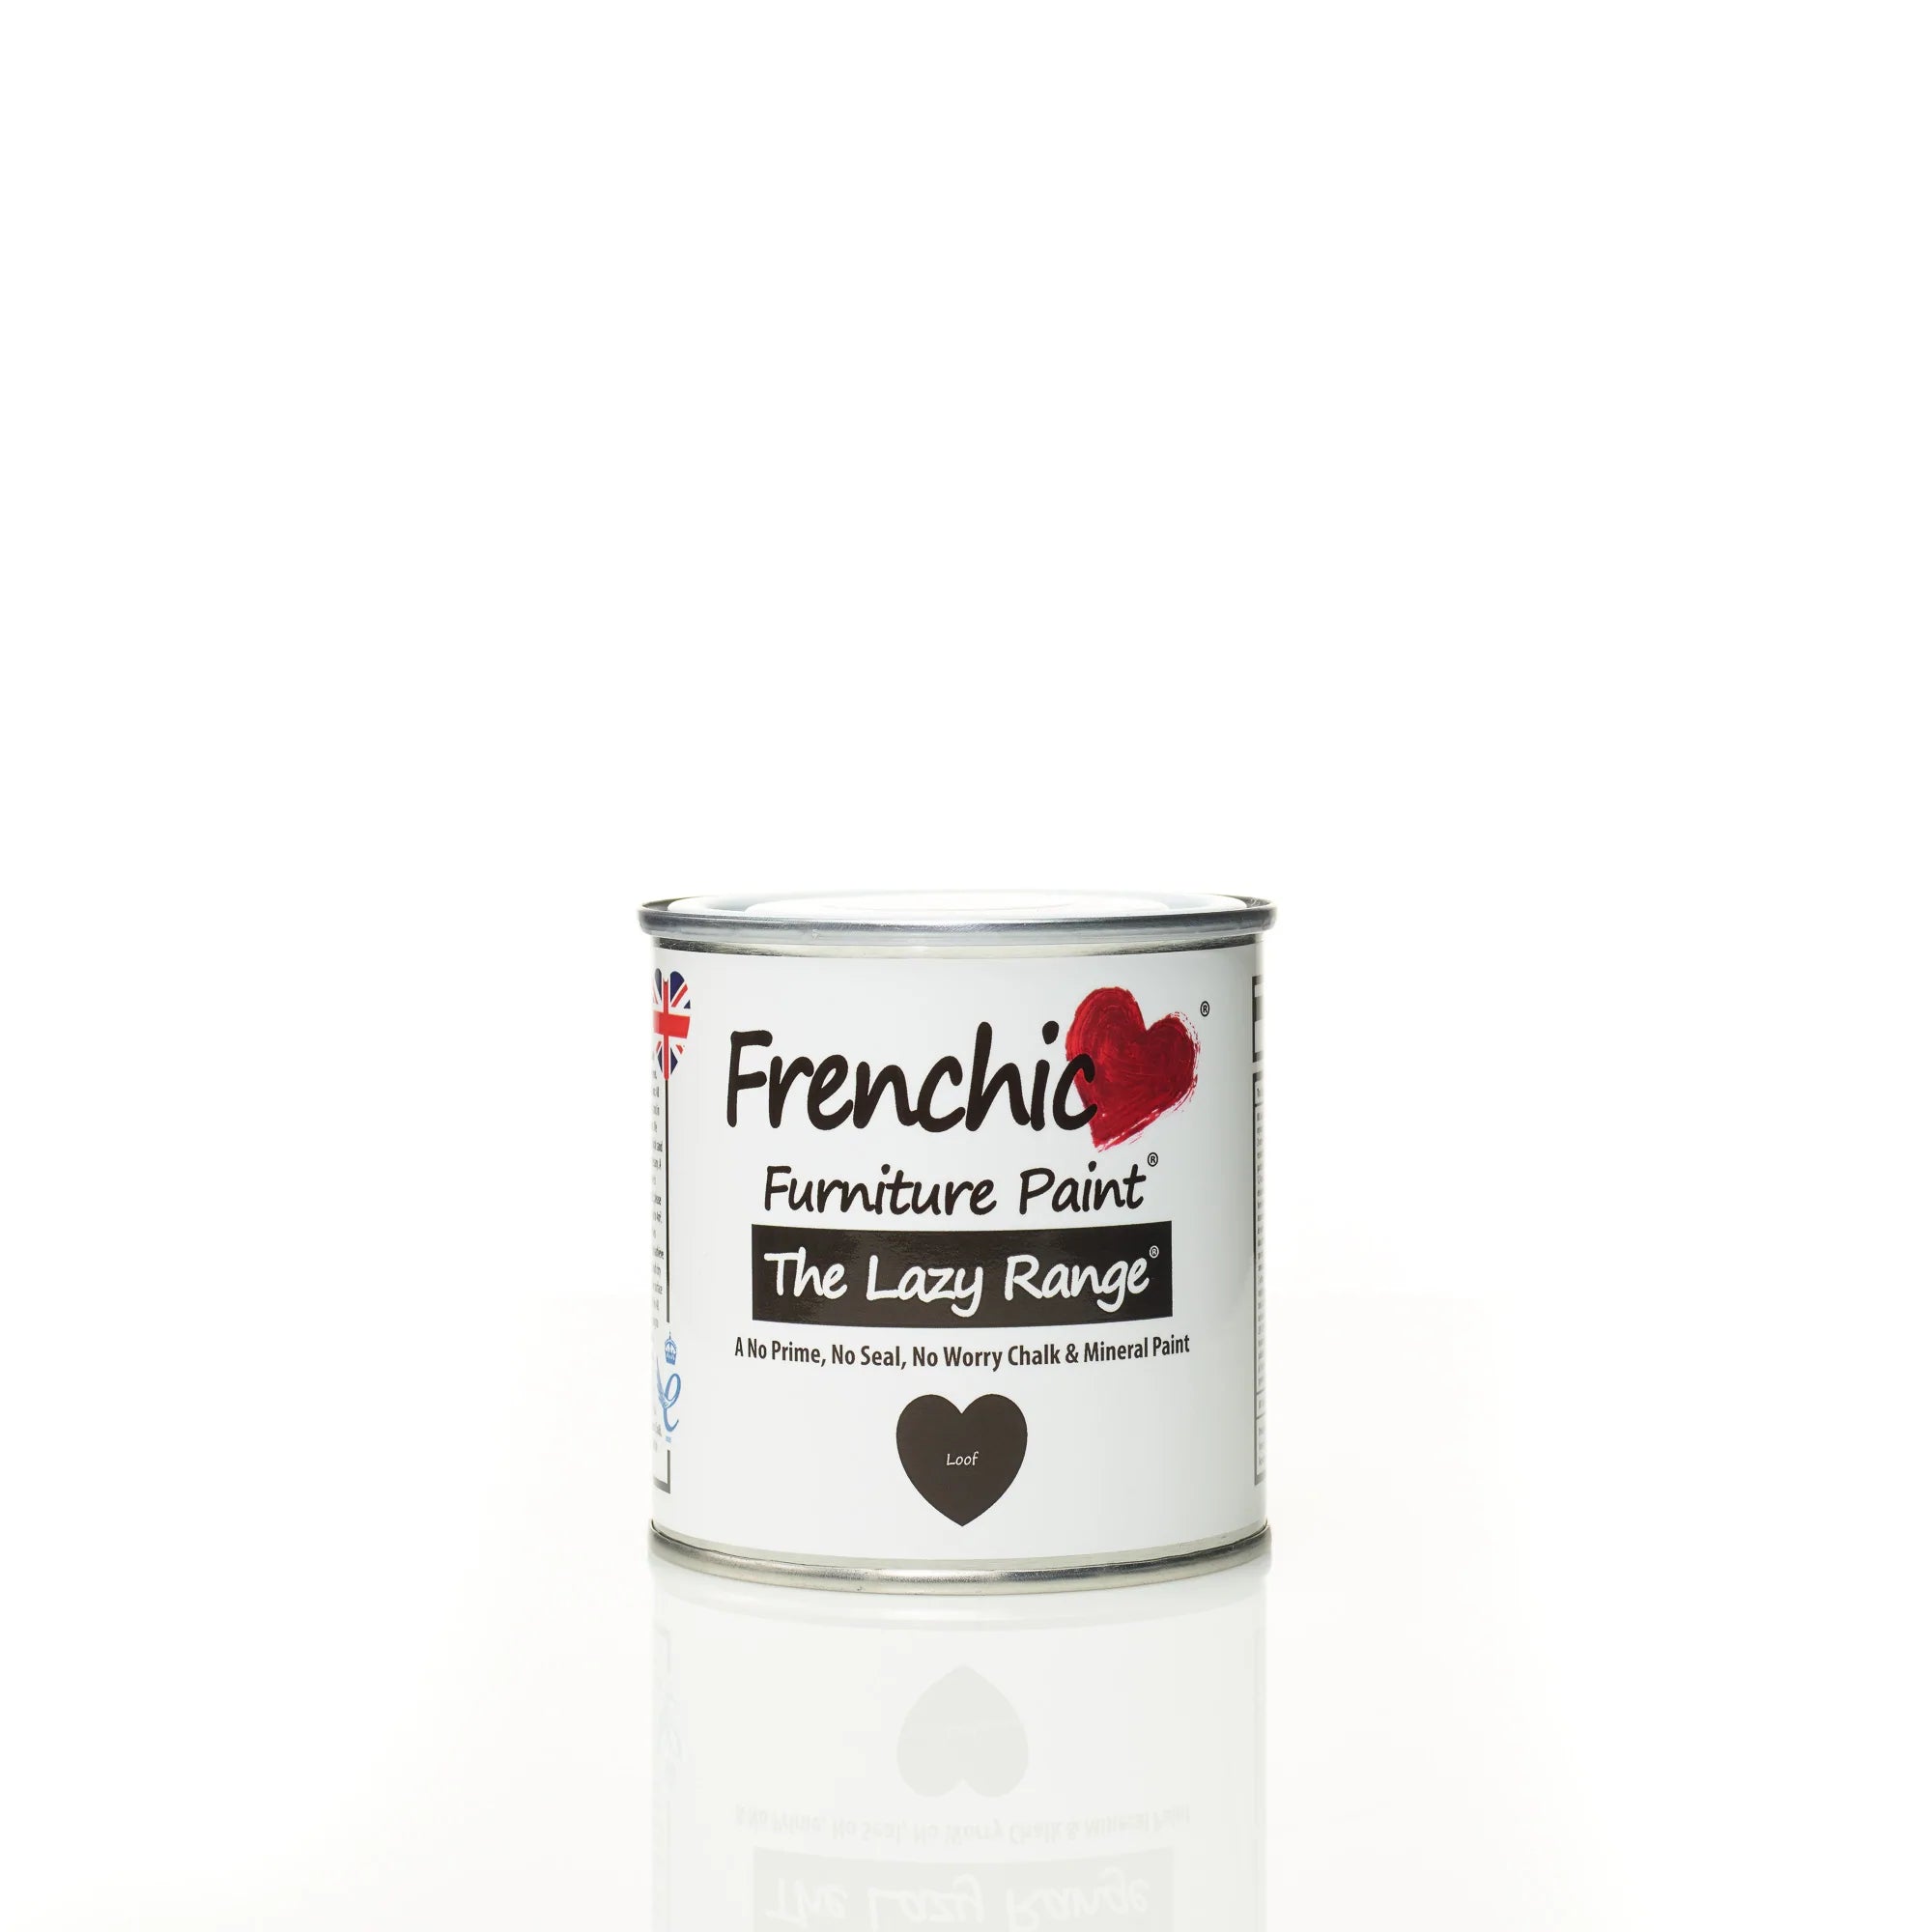 Frenchic Paint | Lazy Range - Loof by Weirs of Baggot St